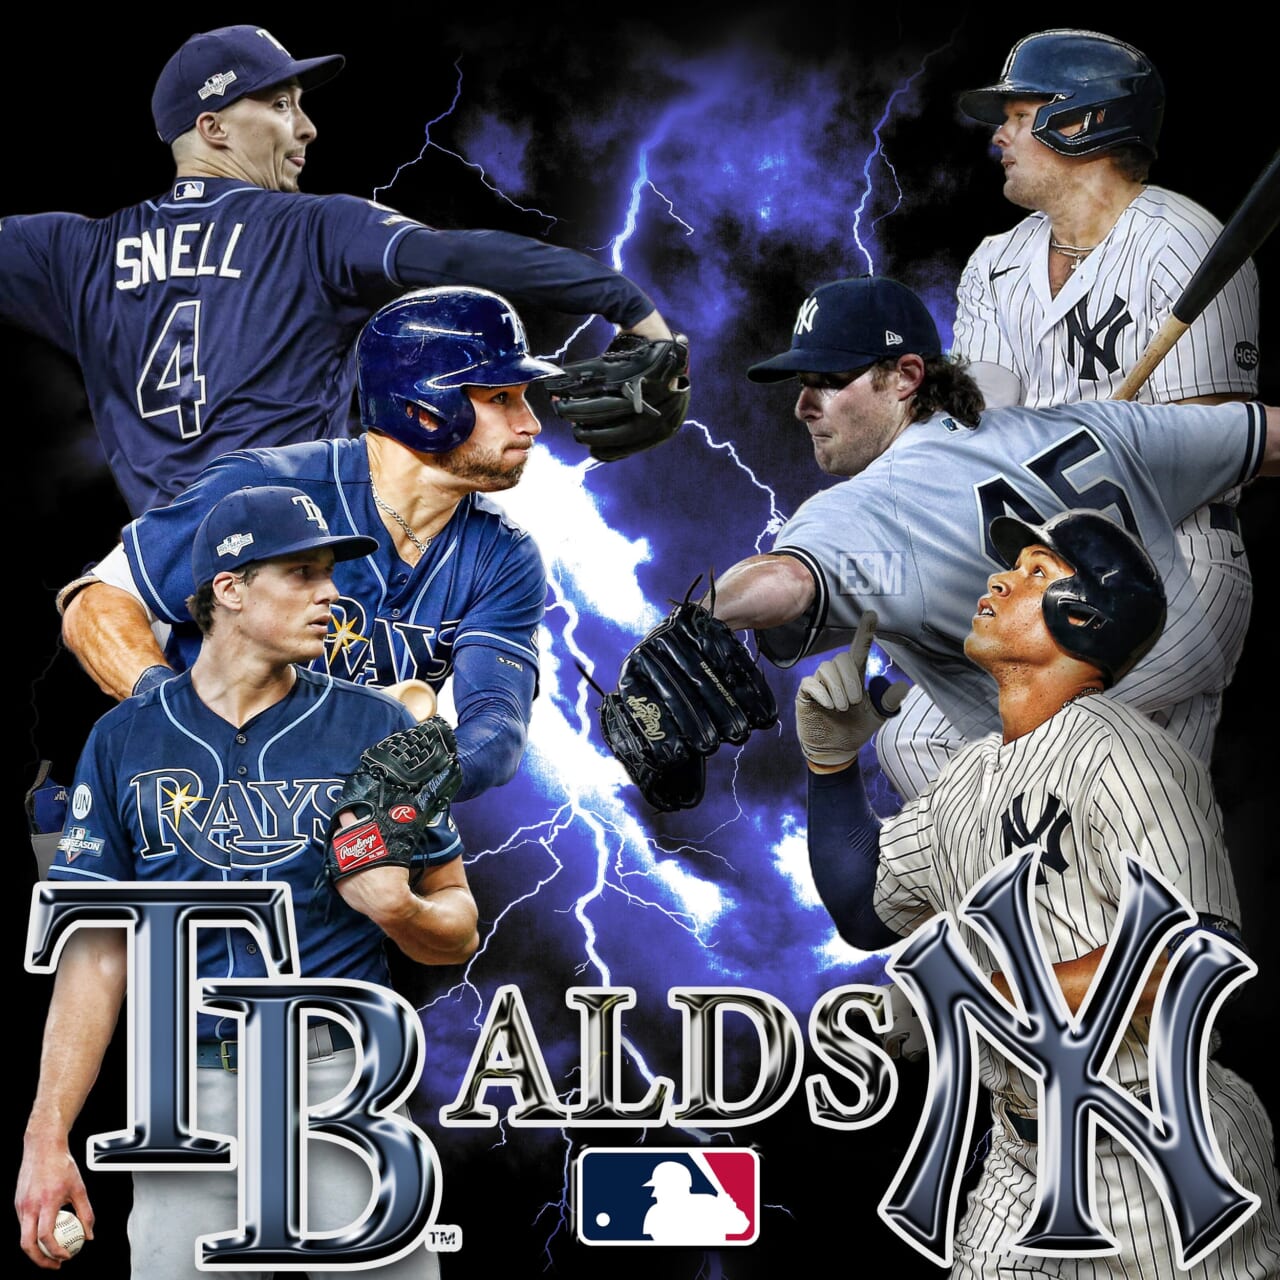 New York Yankees postseason preview: Cole to face Snell in first game of the 2020 postseason ALDS